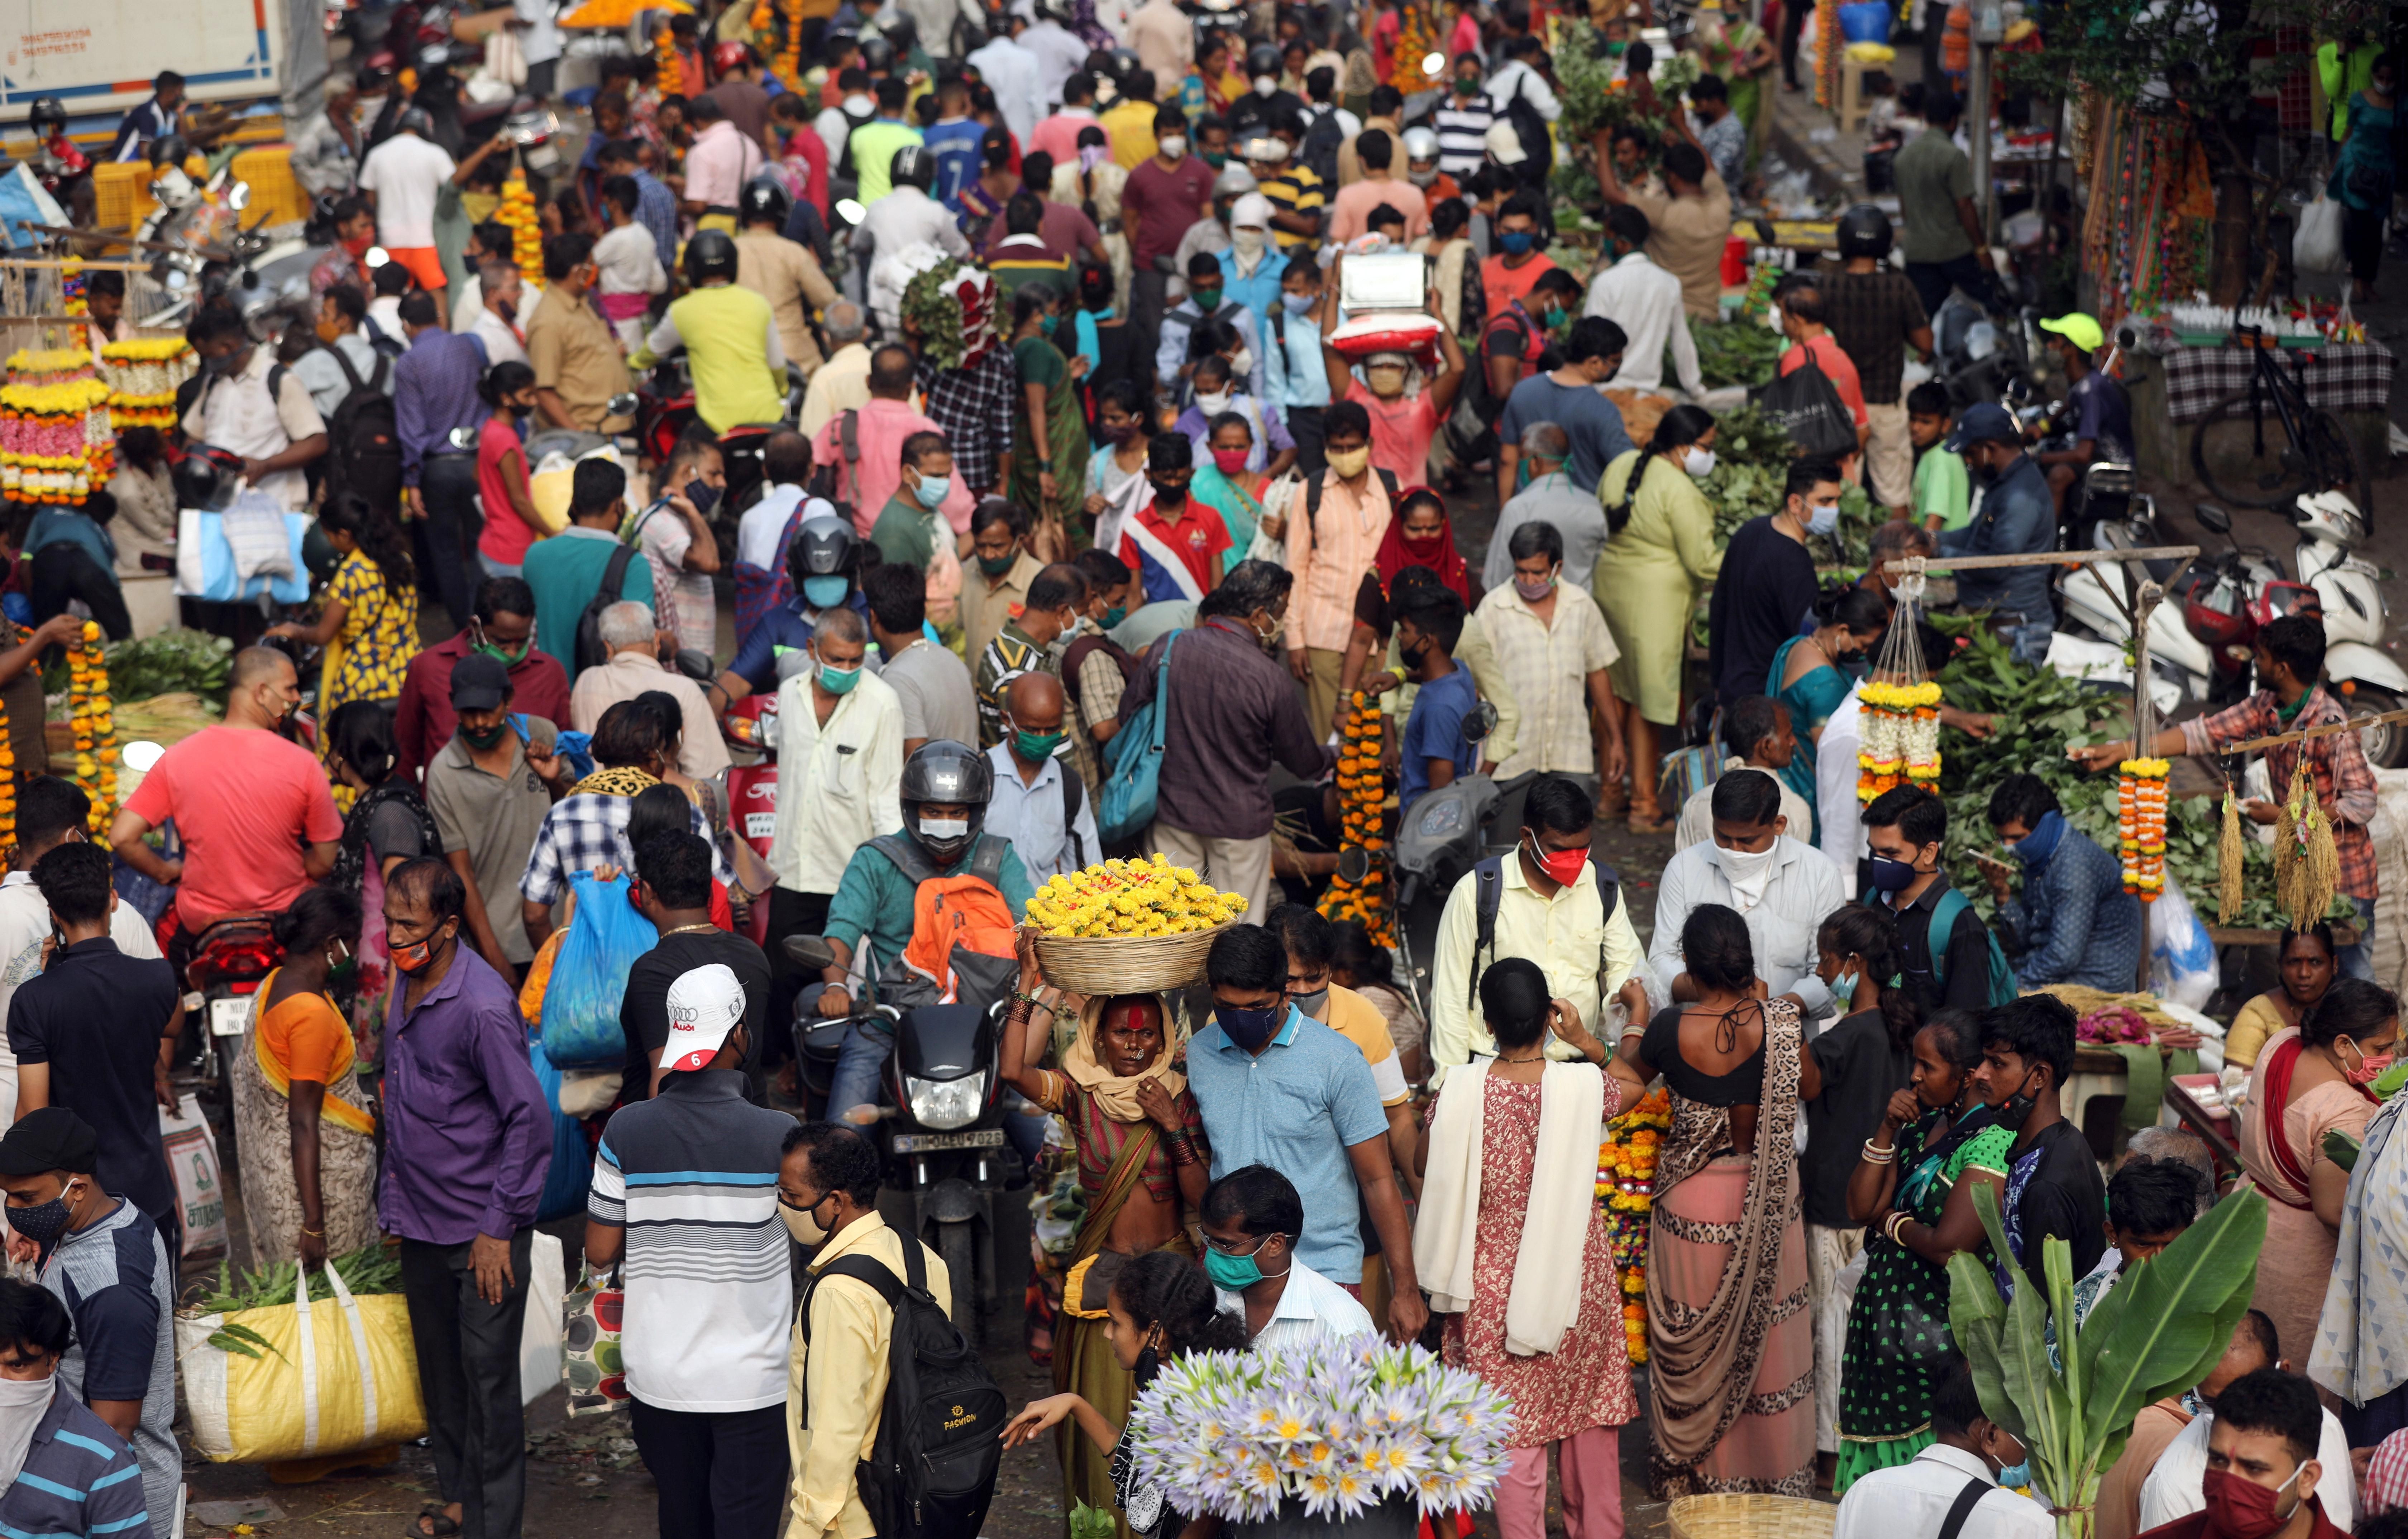 People are seen at a crowded market a day before the Hindu festival of Dussehra amidst the spread of the coronavirus disease (COVID-19) in Mumbai, India, October 24, 2020